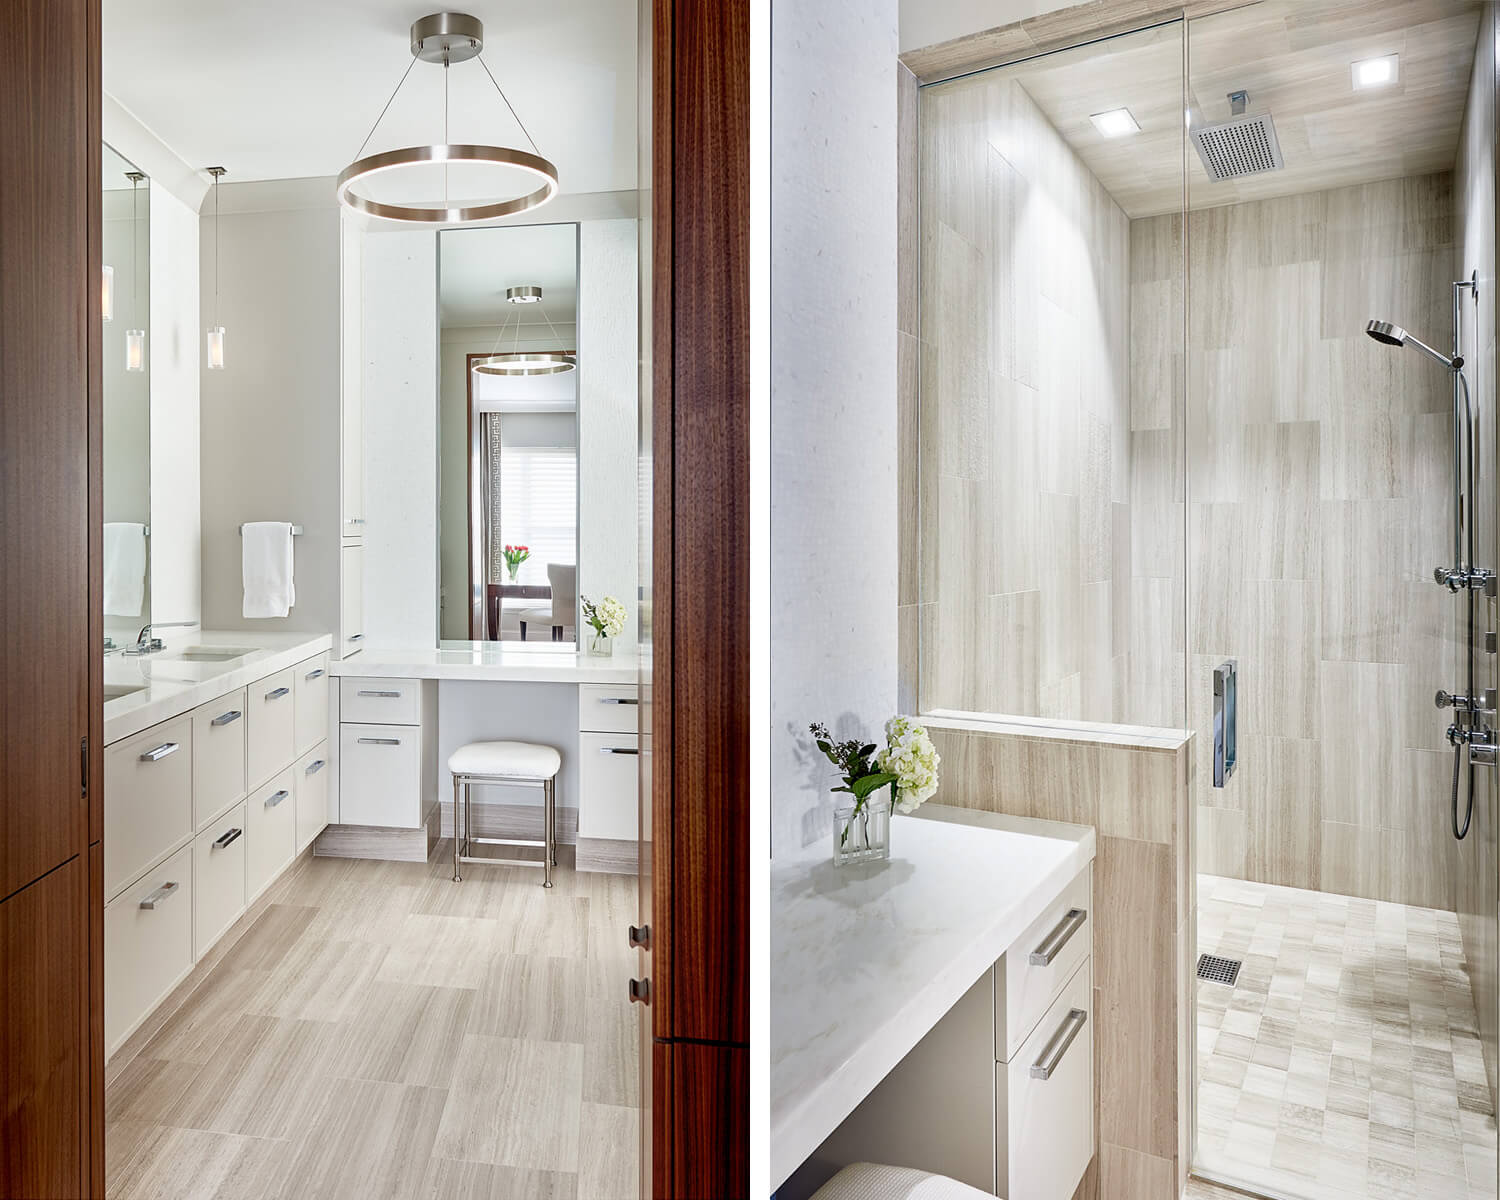 Bistany Design used Dutch Made custom cabinetry in this uptown bathroom remodel in Charlotte NC